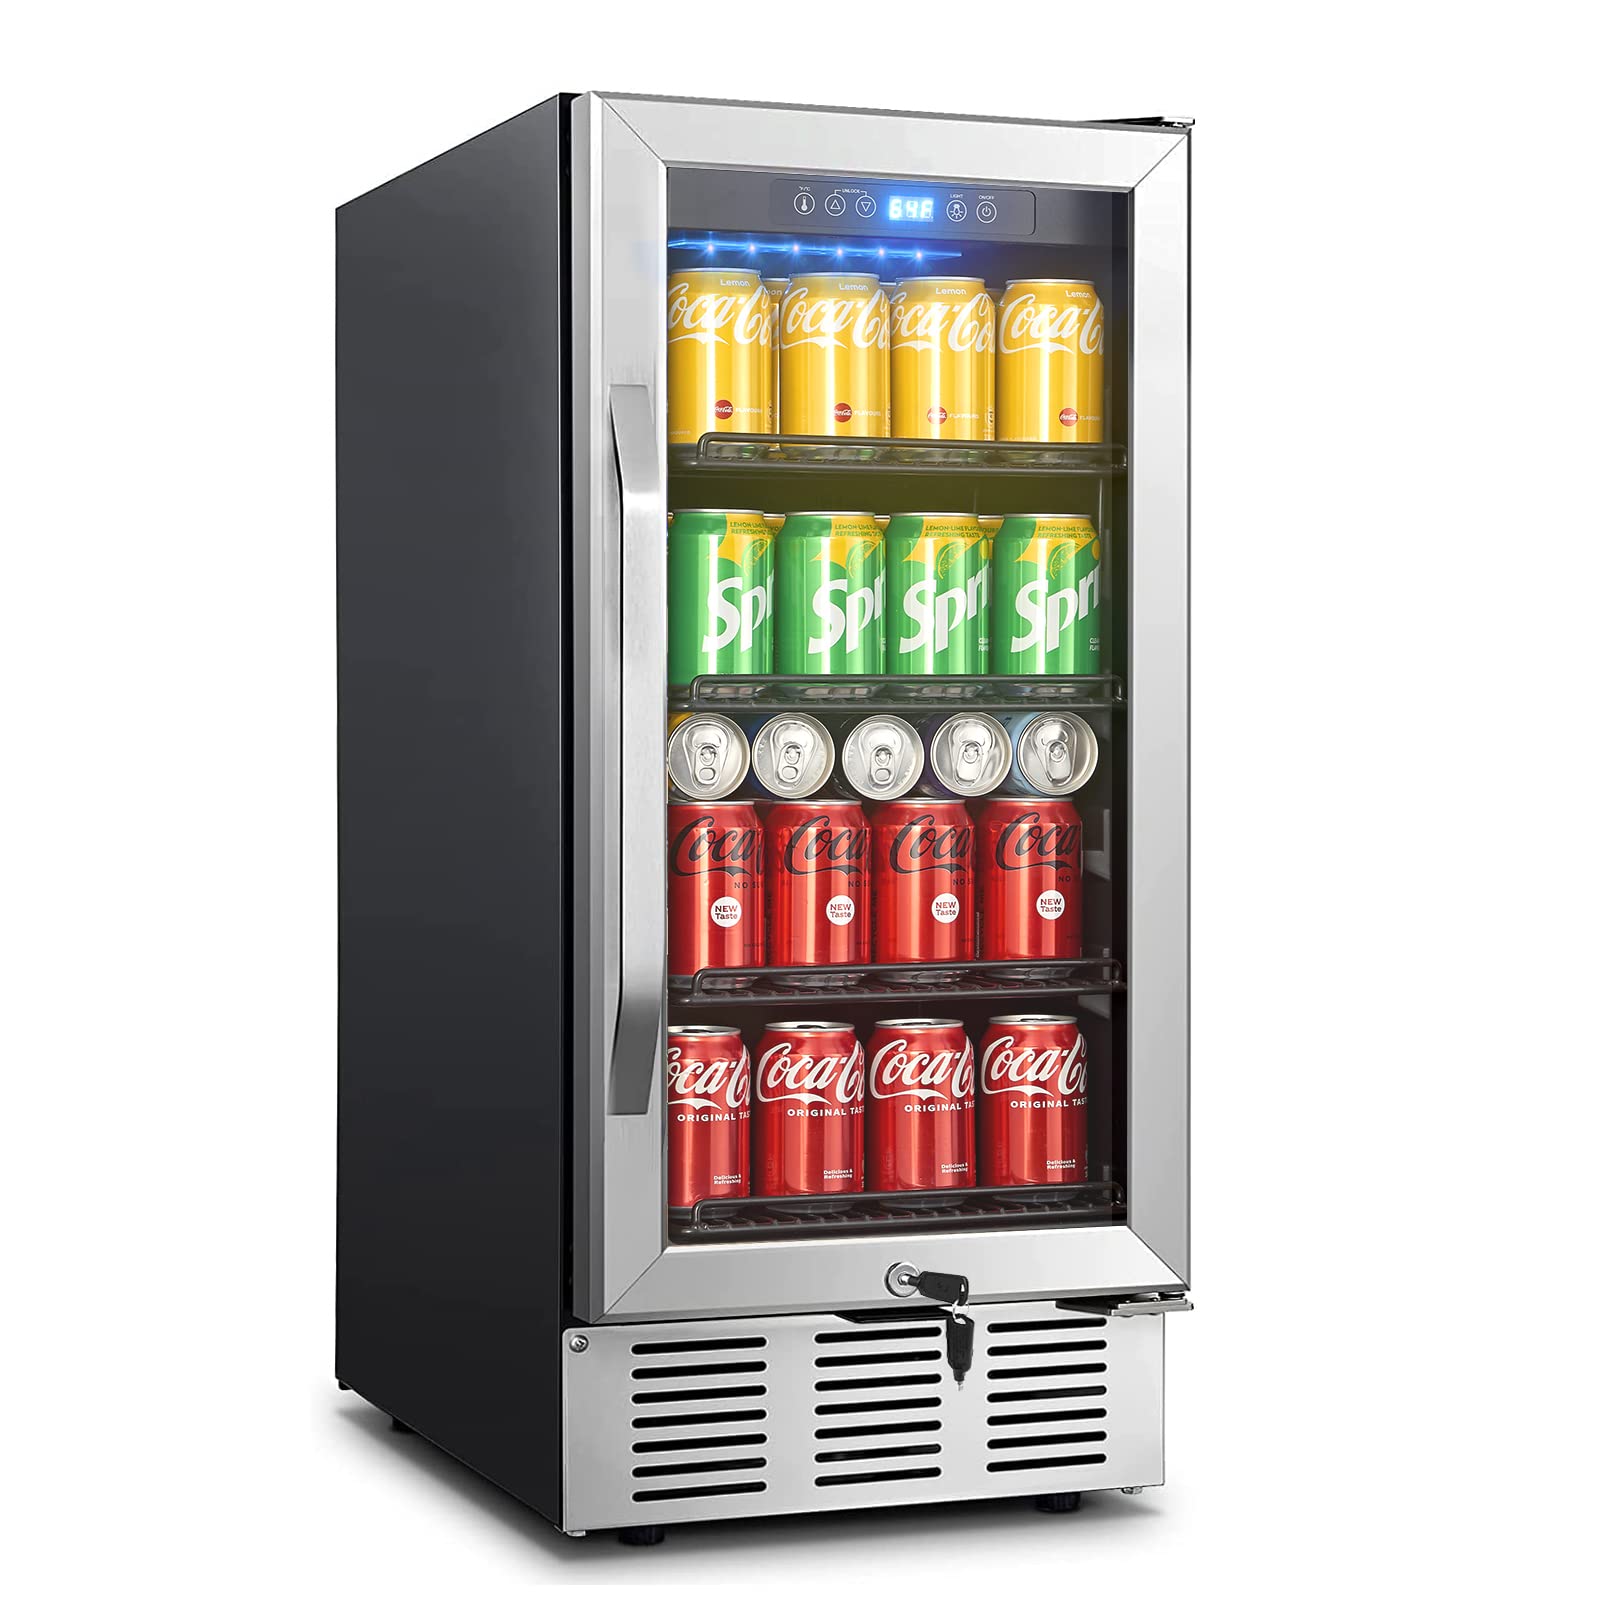 Frigidaire Beverage Coolers: The Best Models for Any Home in 2023